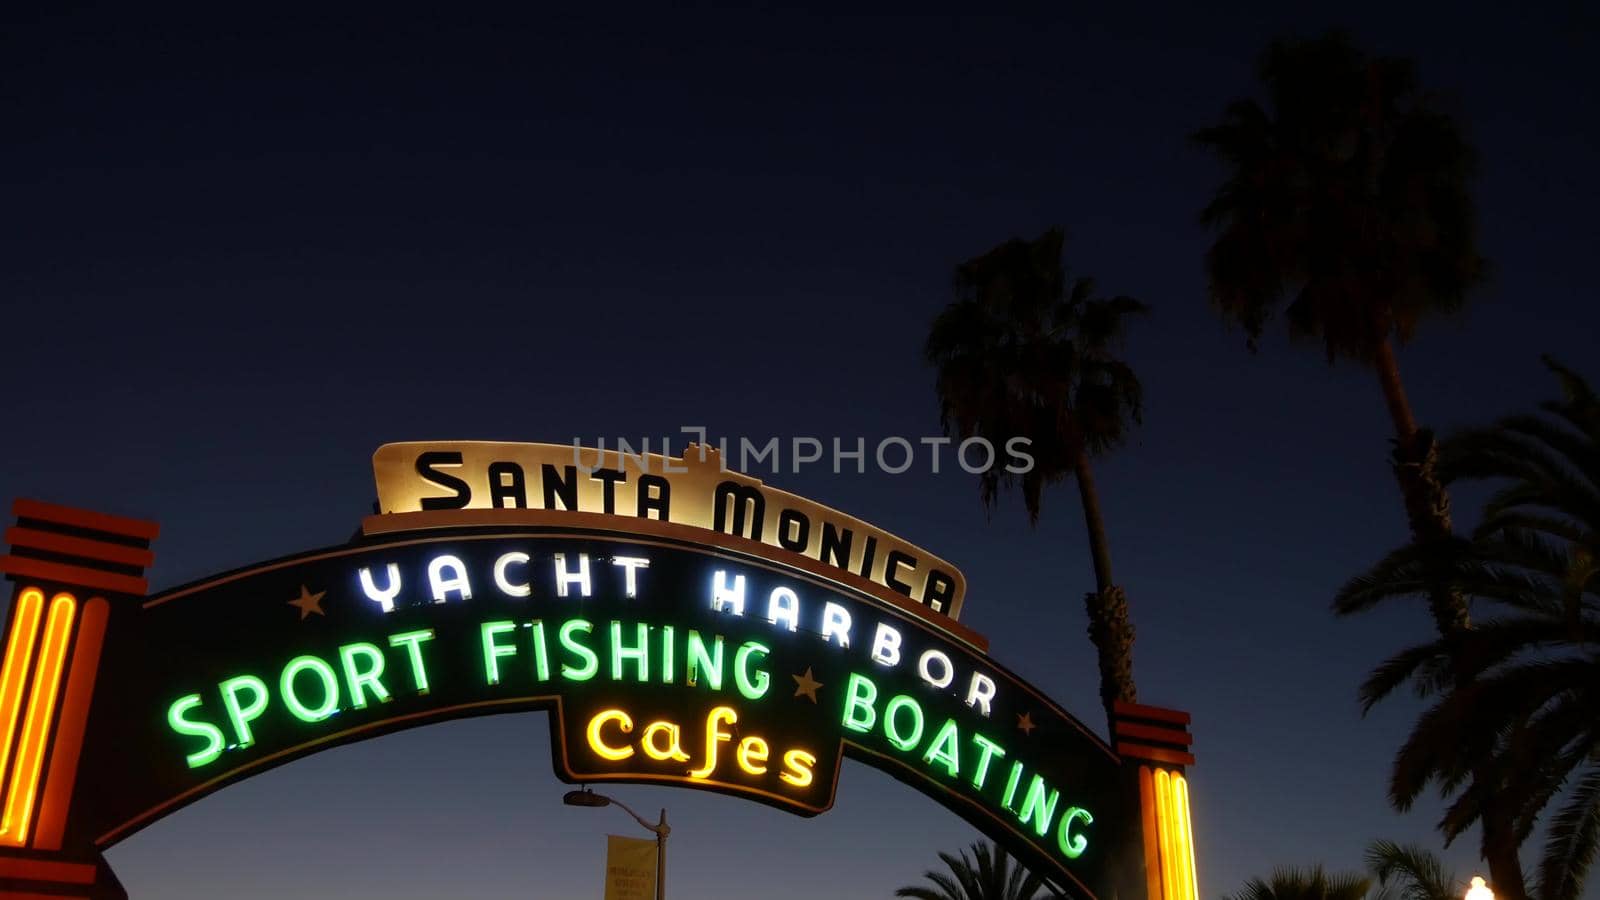 SANTA MONICA, LOS ANGELES CA USA - 19 DEC 2019: Summertime iconic vintage symbol. Classic illuminated retro sign on pier. California summertime aesthetic. Glowing lettering on old-fashioned signboard by DogoraSun